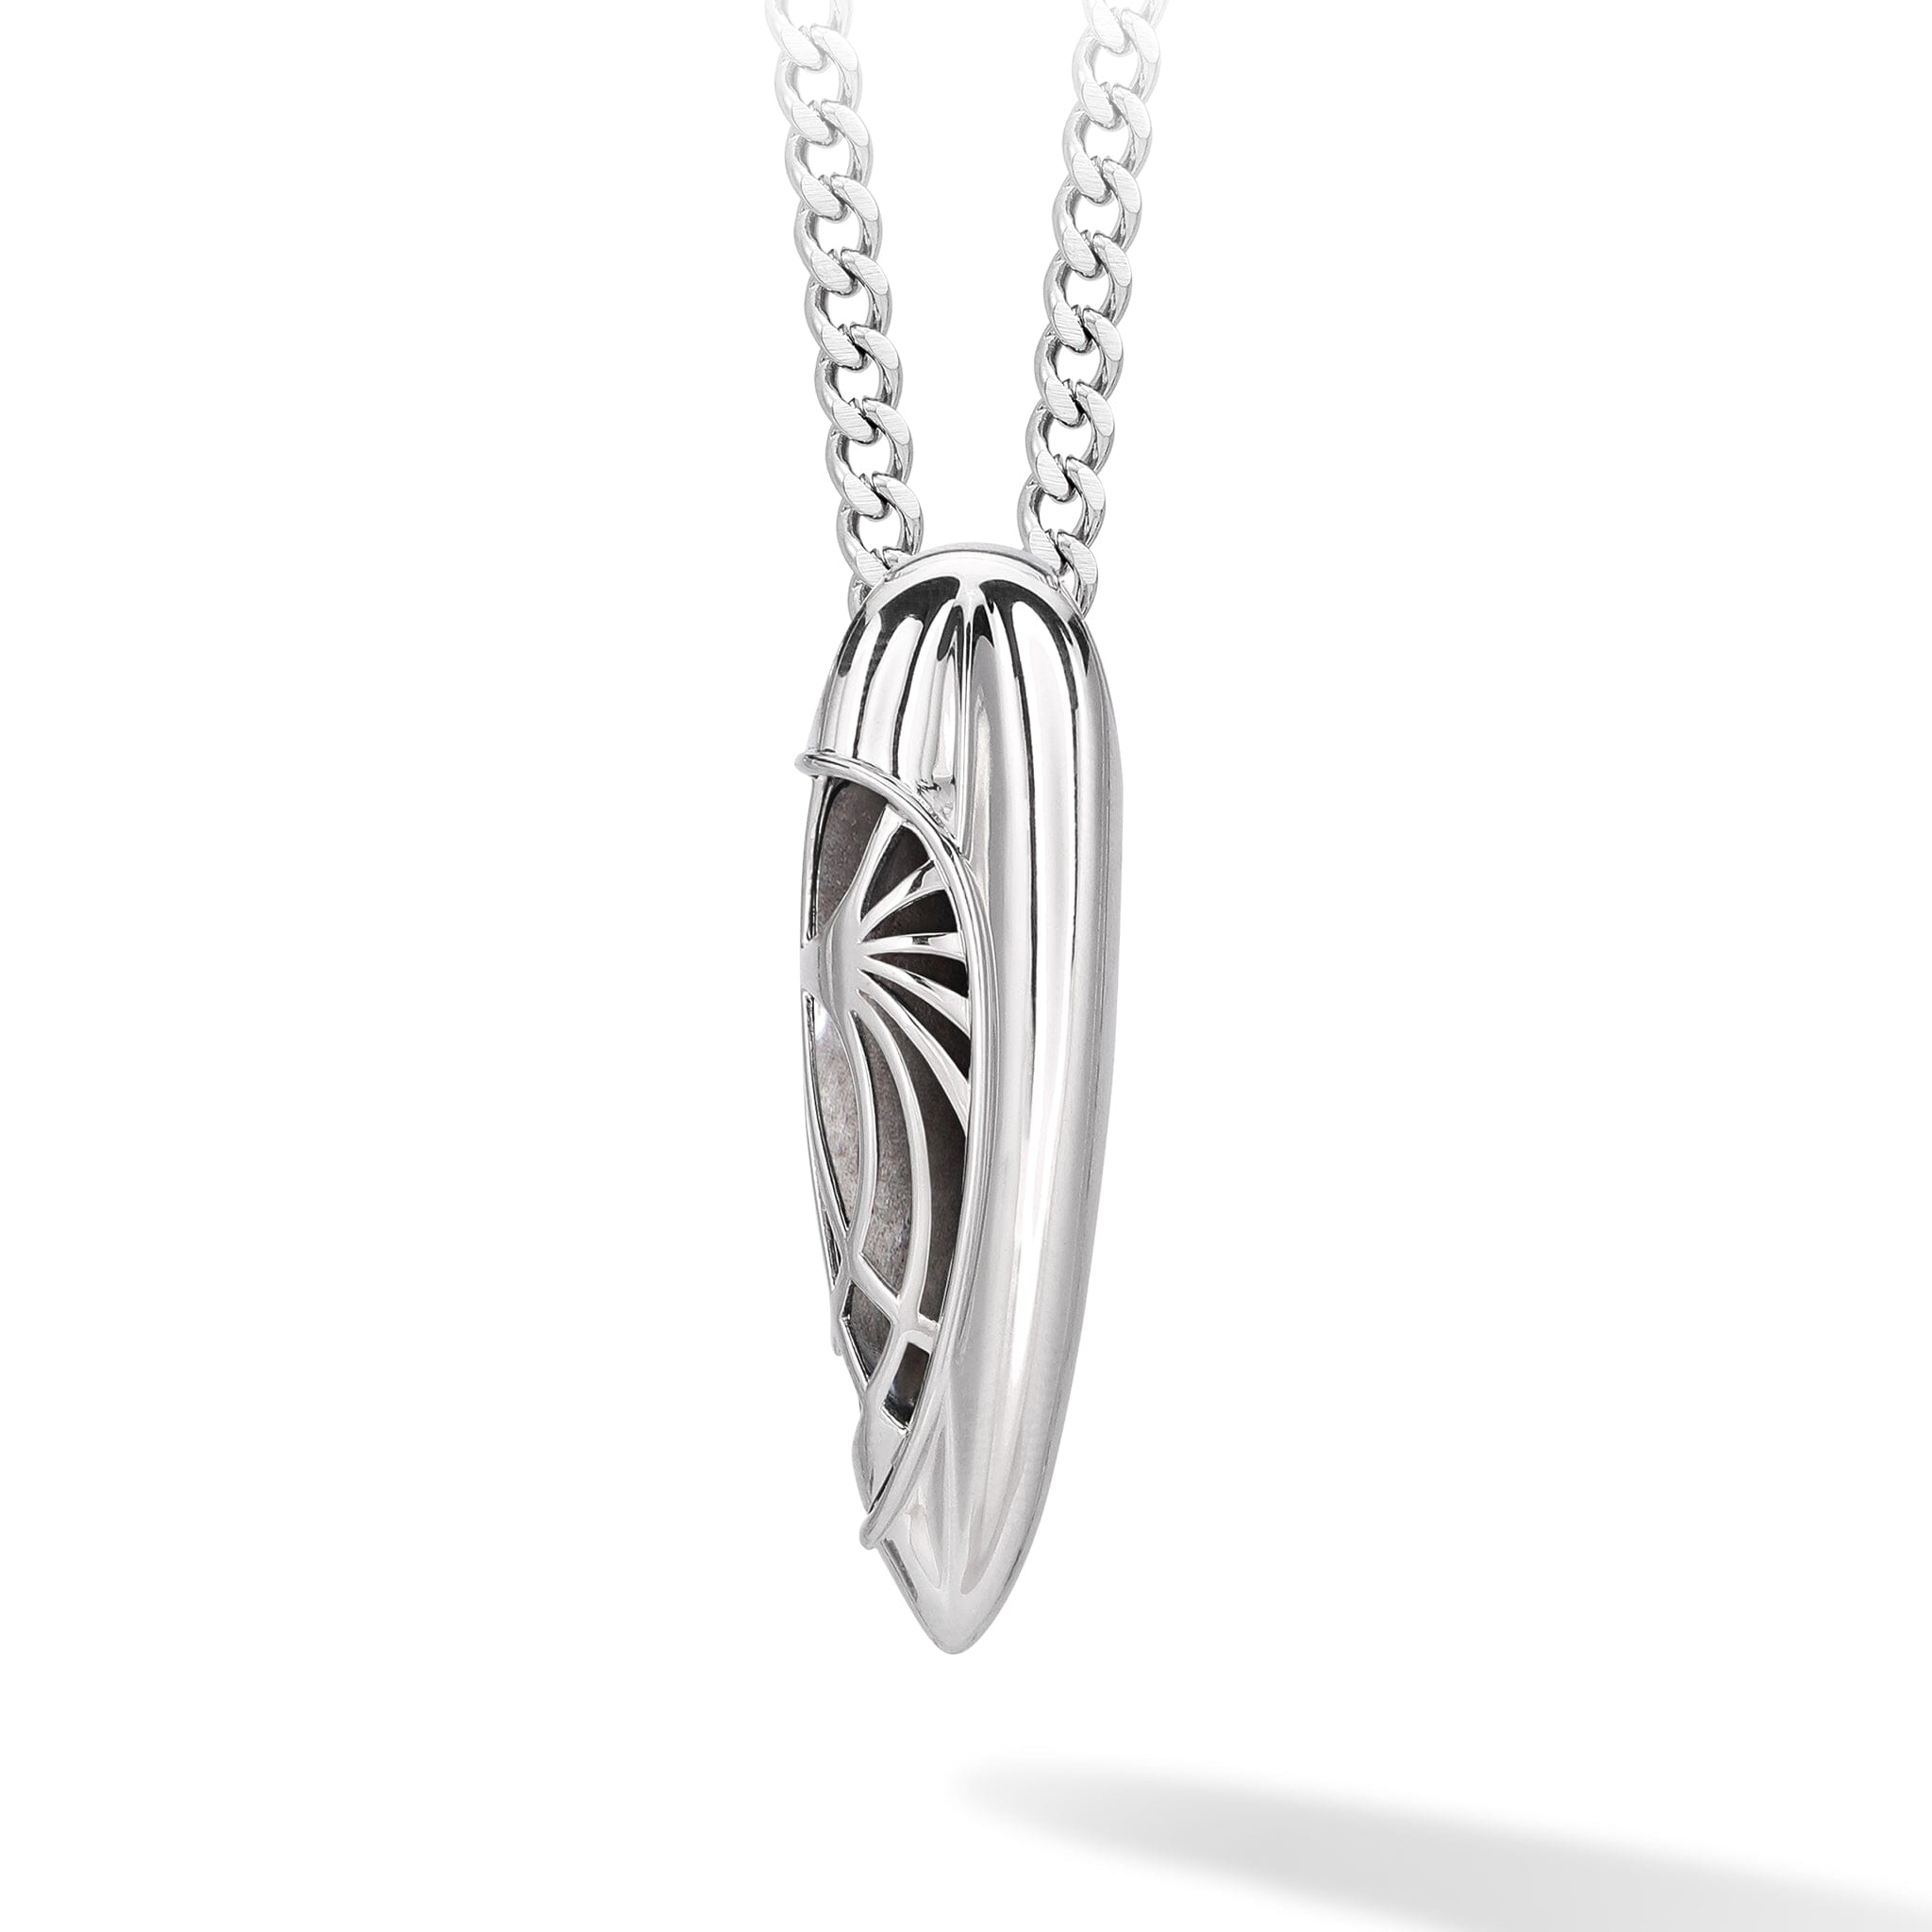 Time Capsule Silver Obsidian Necklace Necklaces AWNL Stainless Set 55cm 